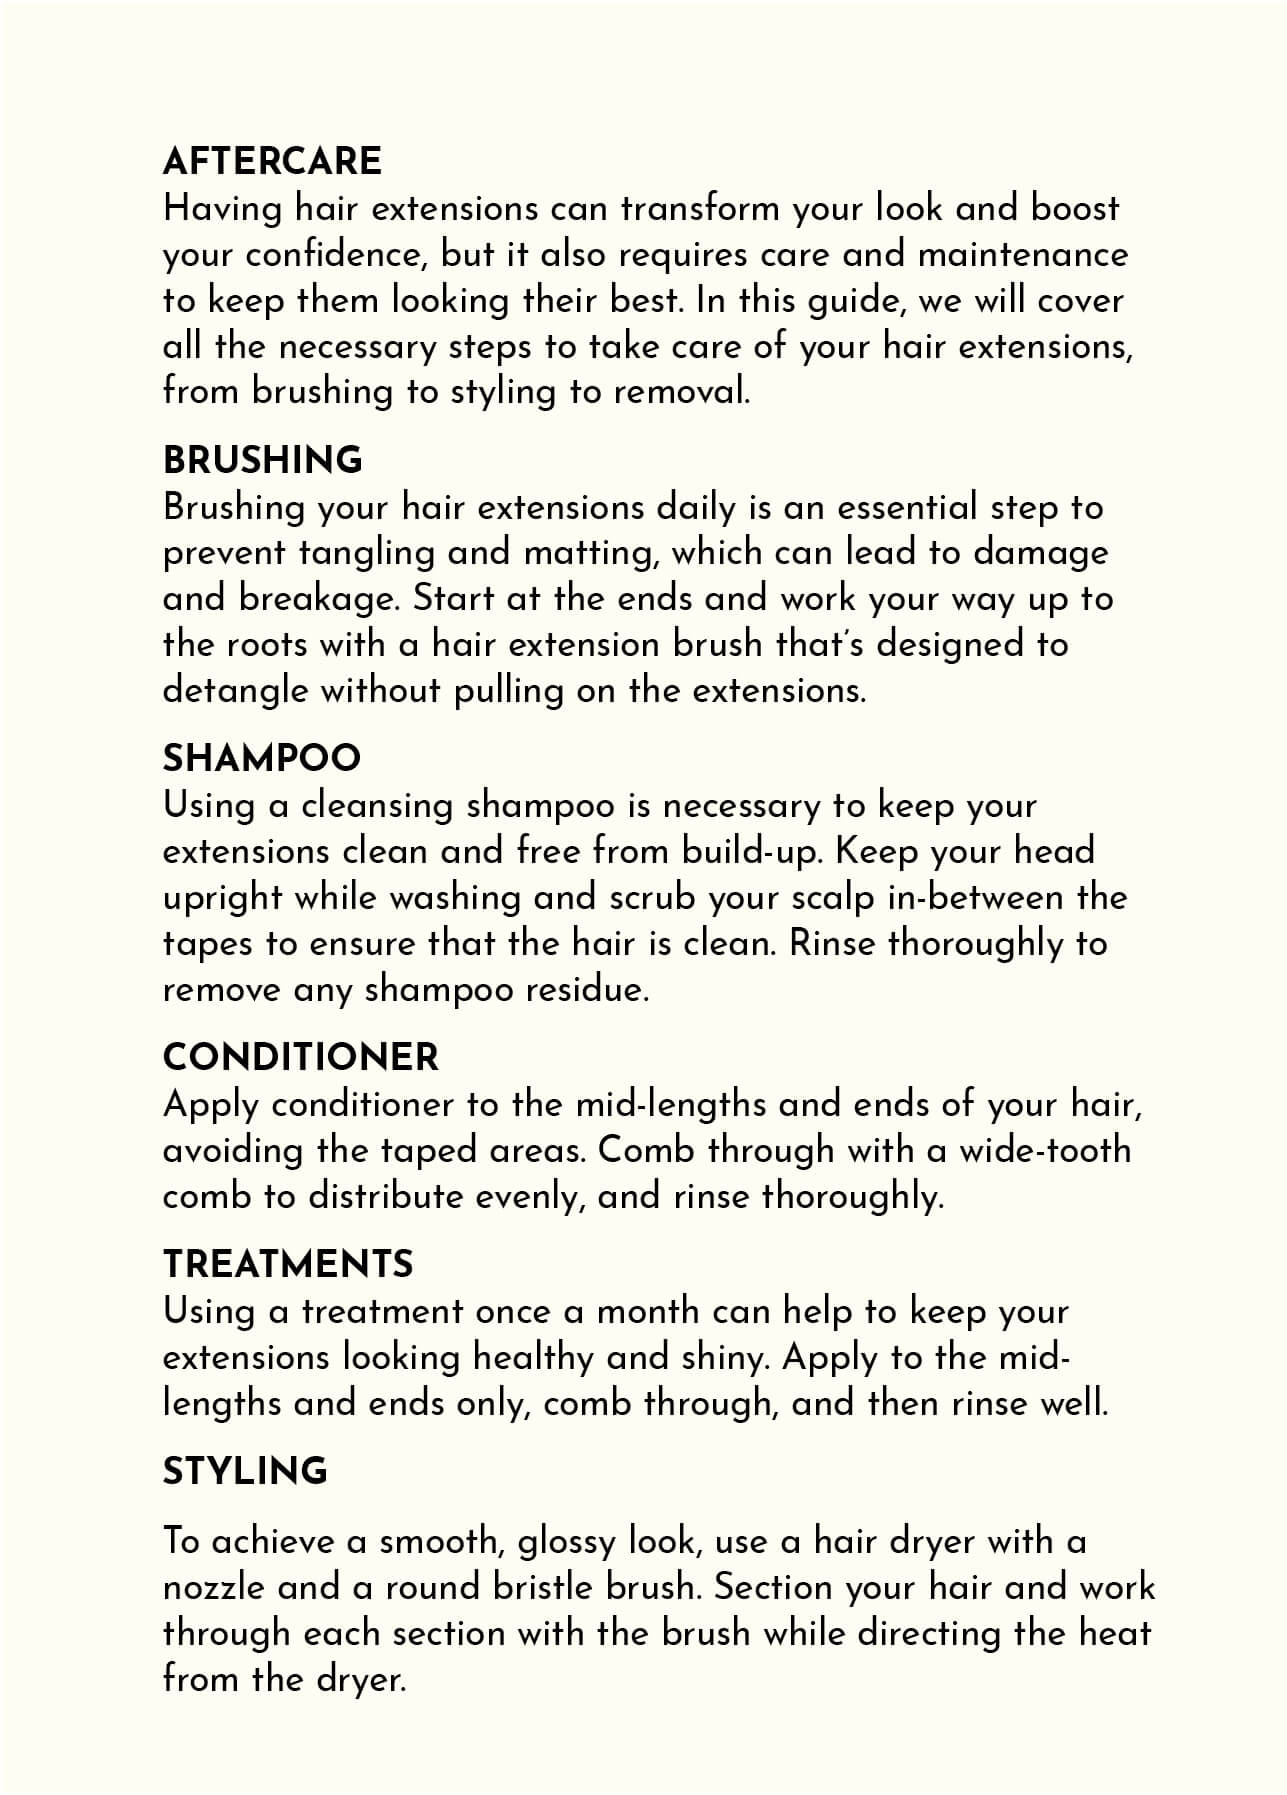 Hair Extension Aftercare Guide Page 3